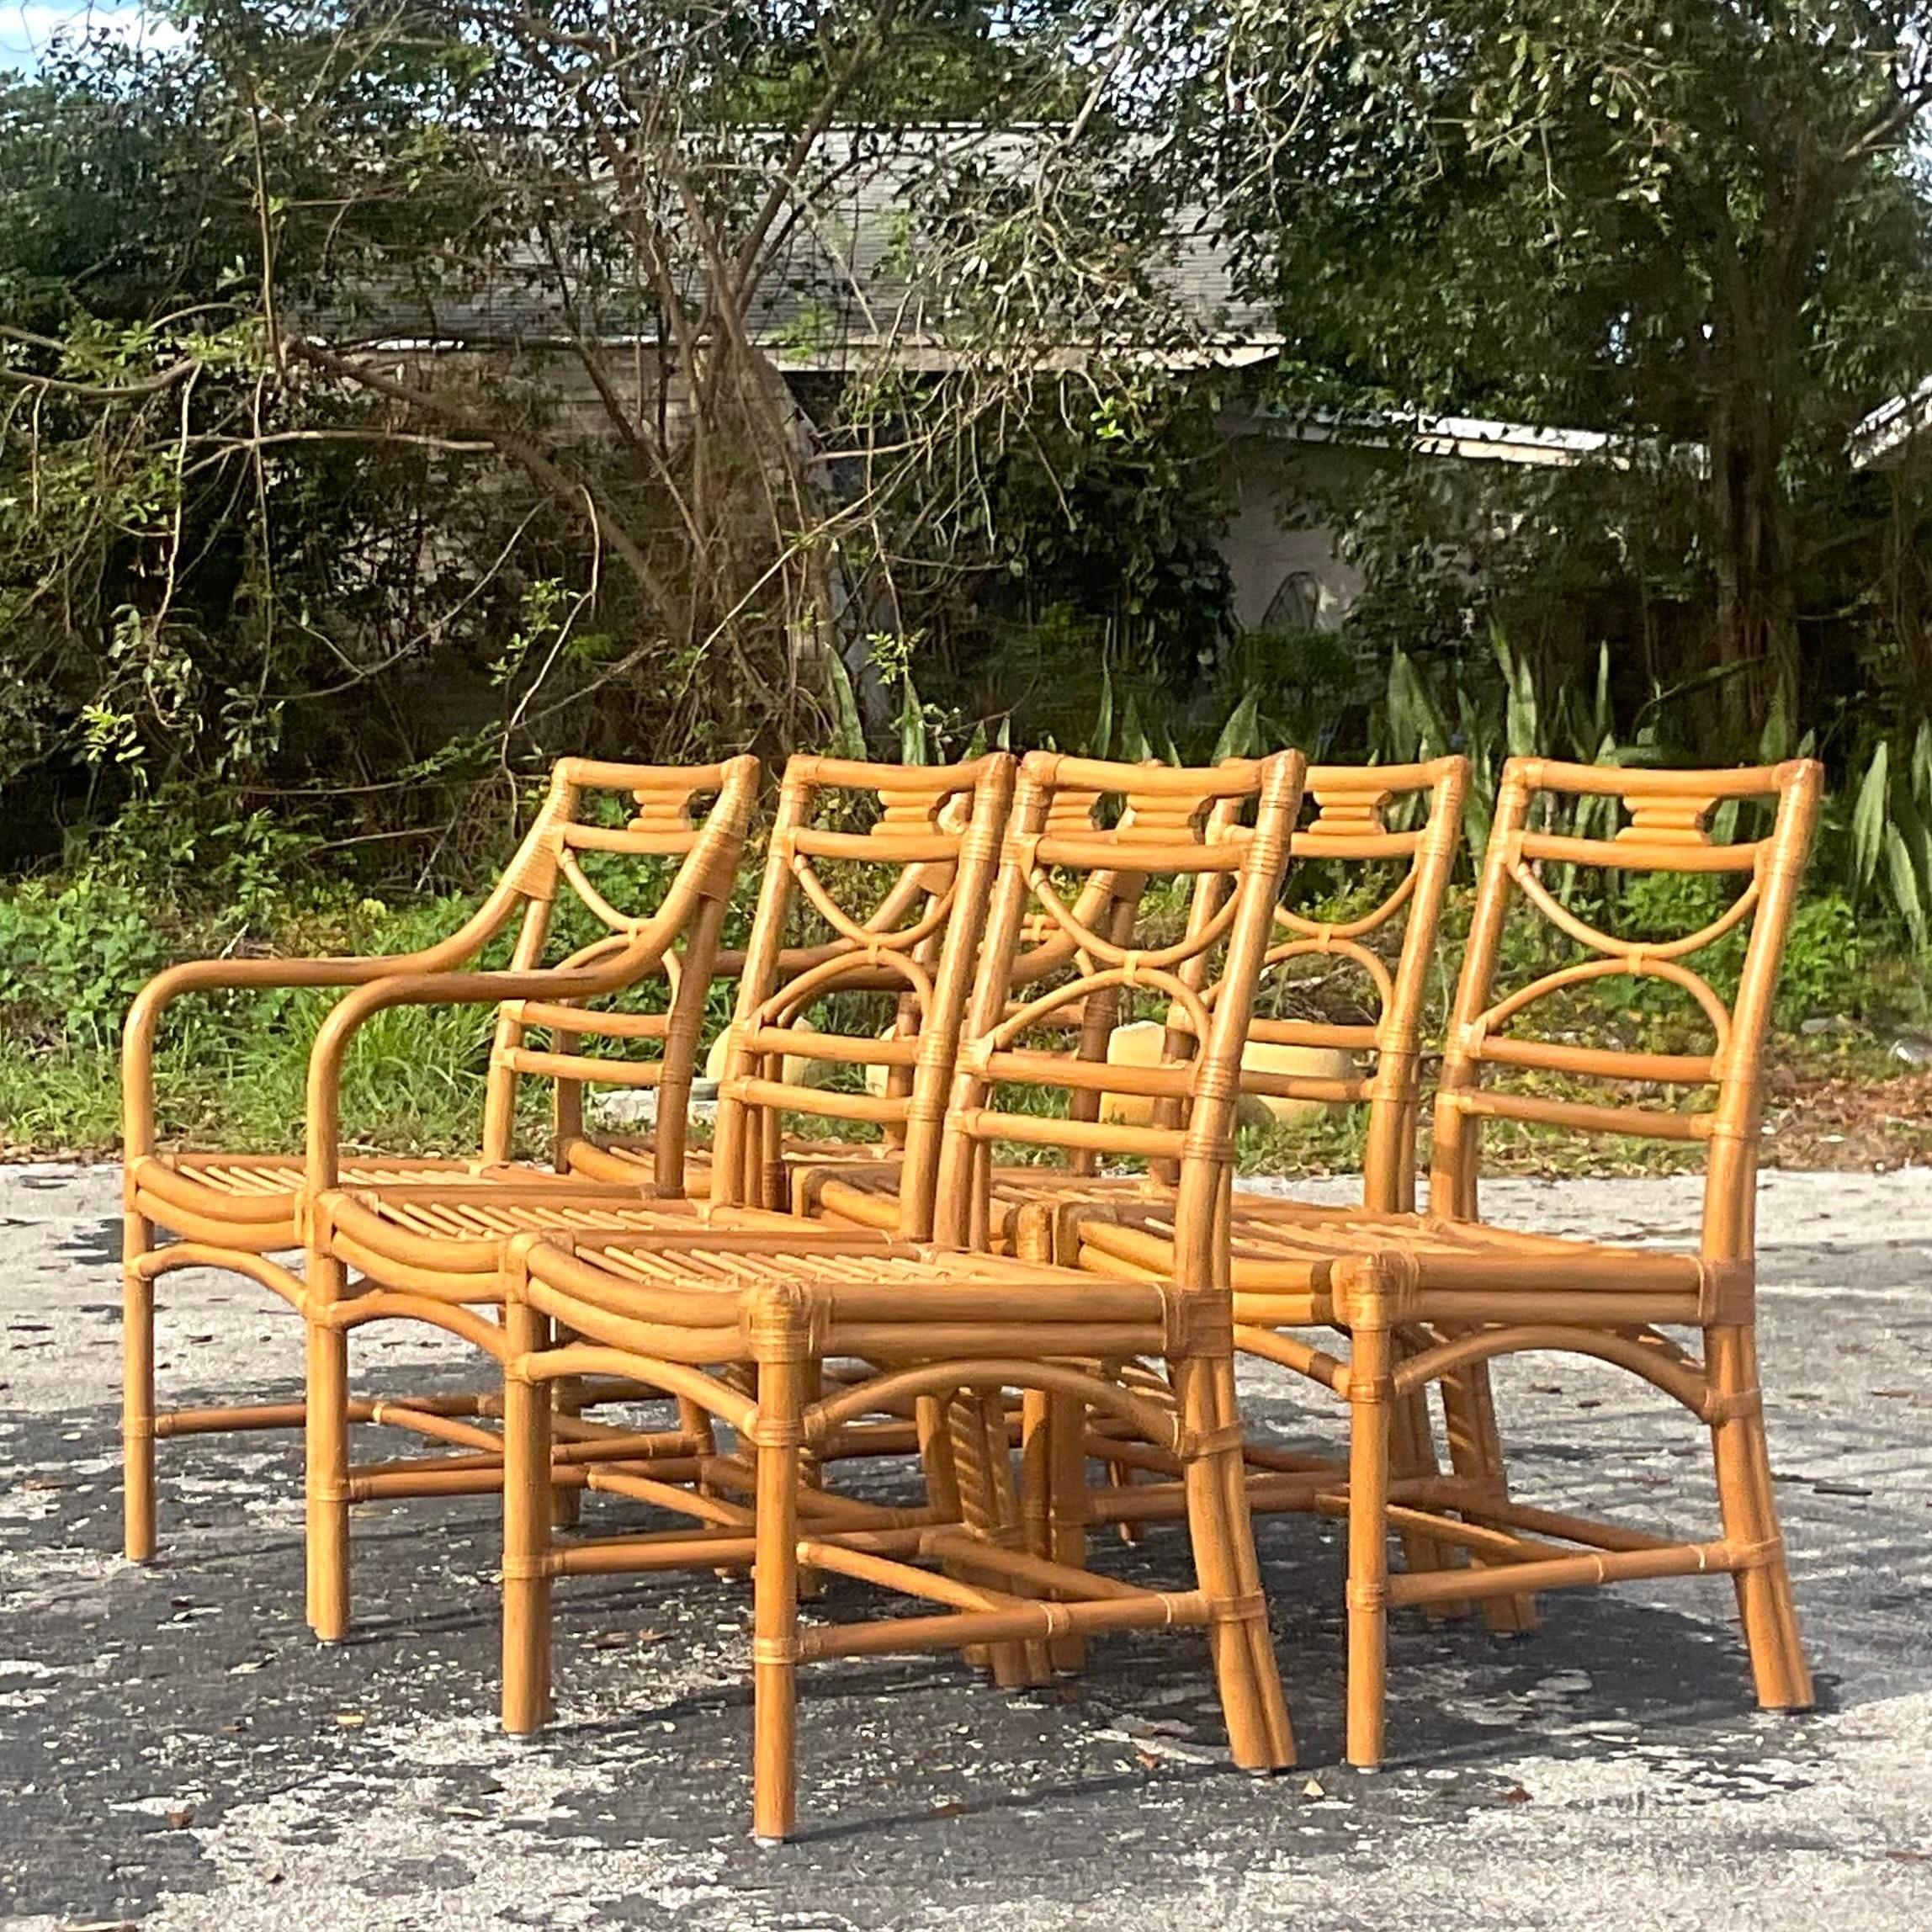 A fabulous set of six vintage Coastal dining chairs. Beautiful bent rattan done in the manner of McGuire. Two arm chairs and four side chairs. Acquired from a Palm Beach estate.

Arm chairs - 21.75x16.5x34